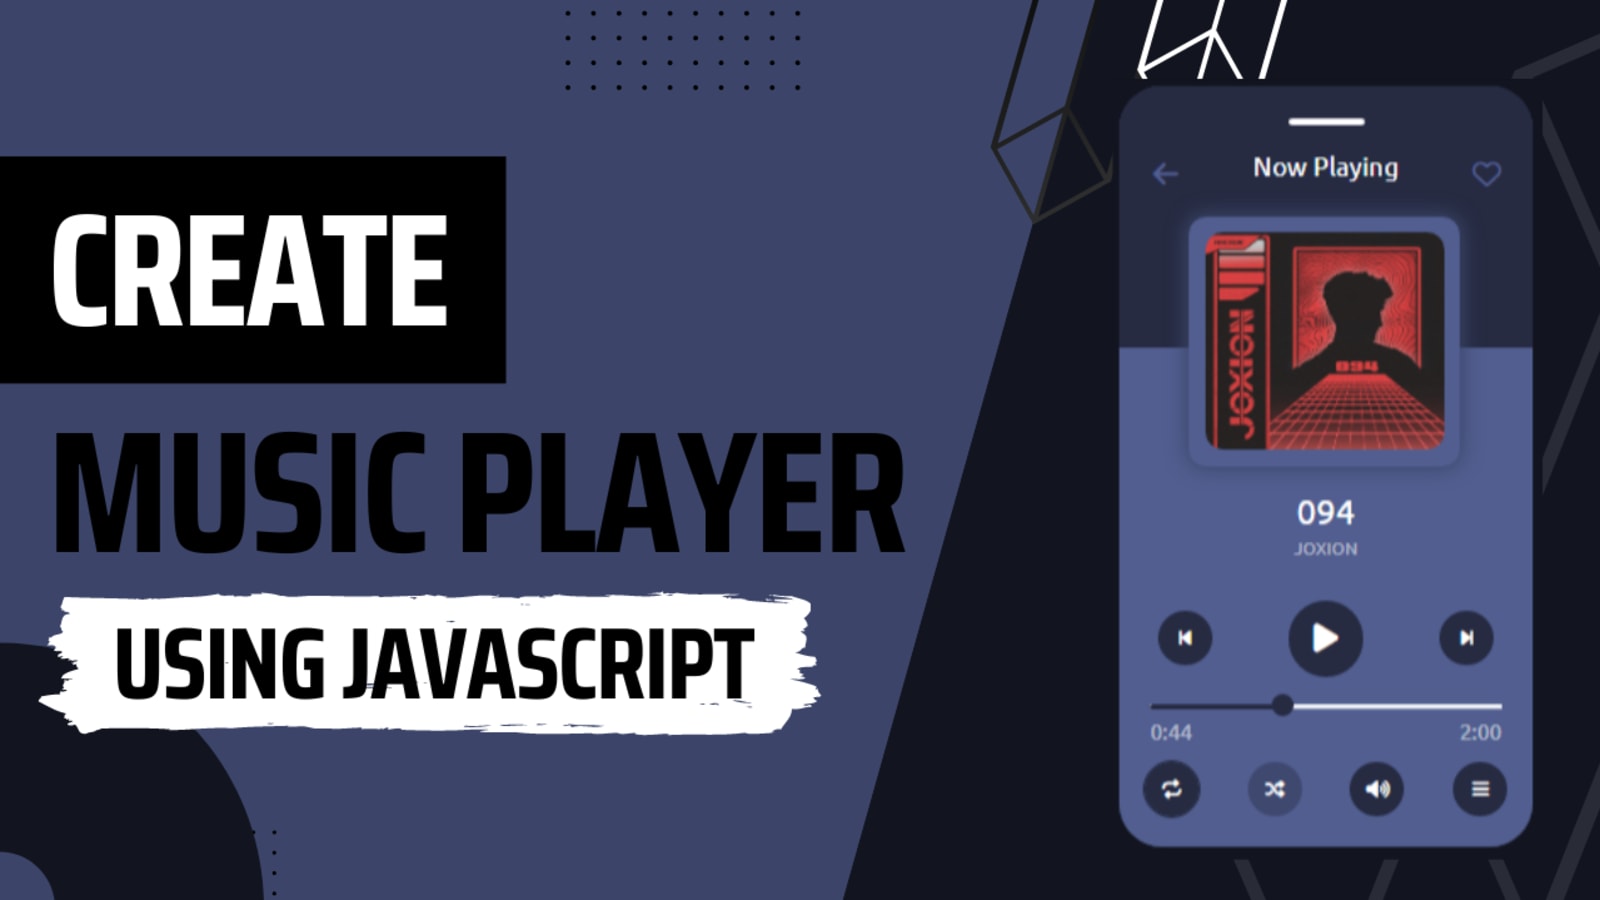 Build a Music Player with JavaScript - Live Coding Tutorial 